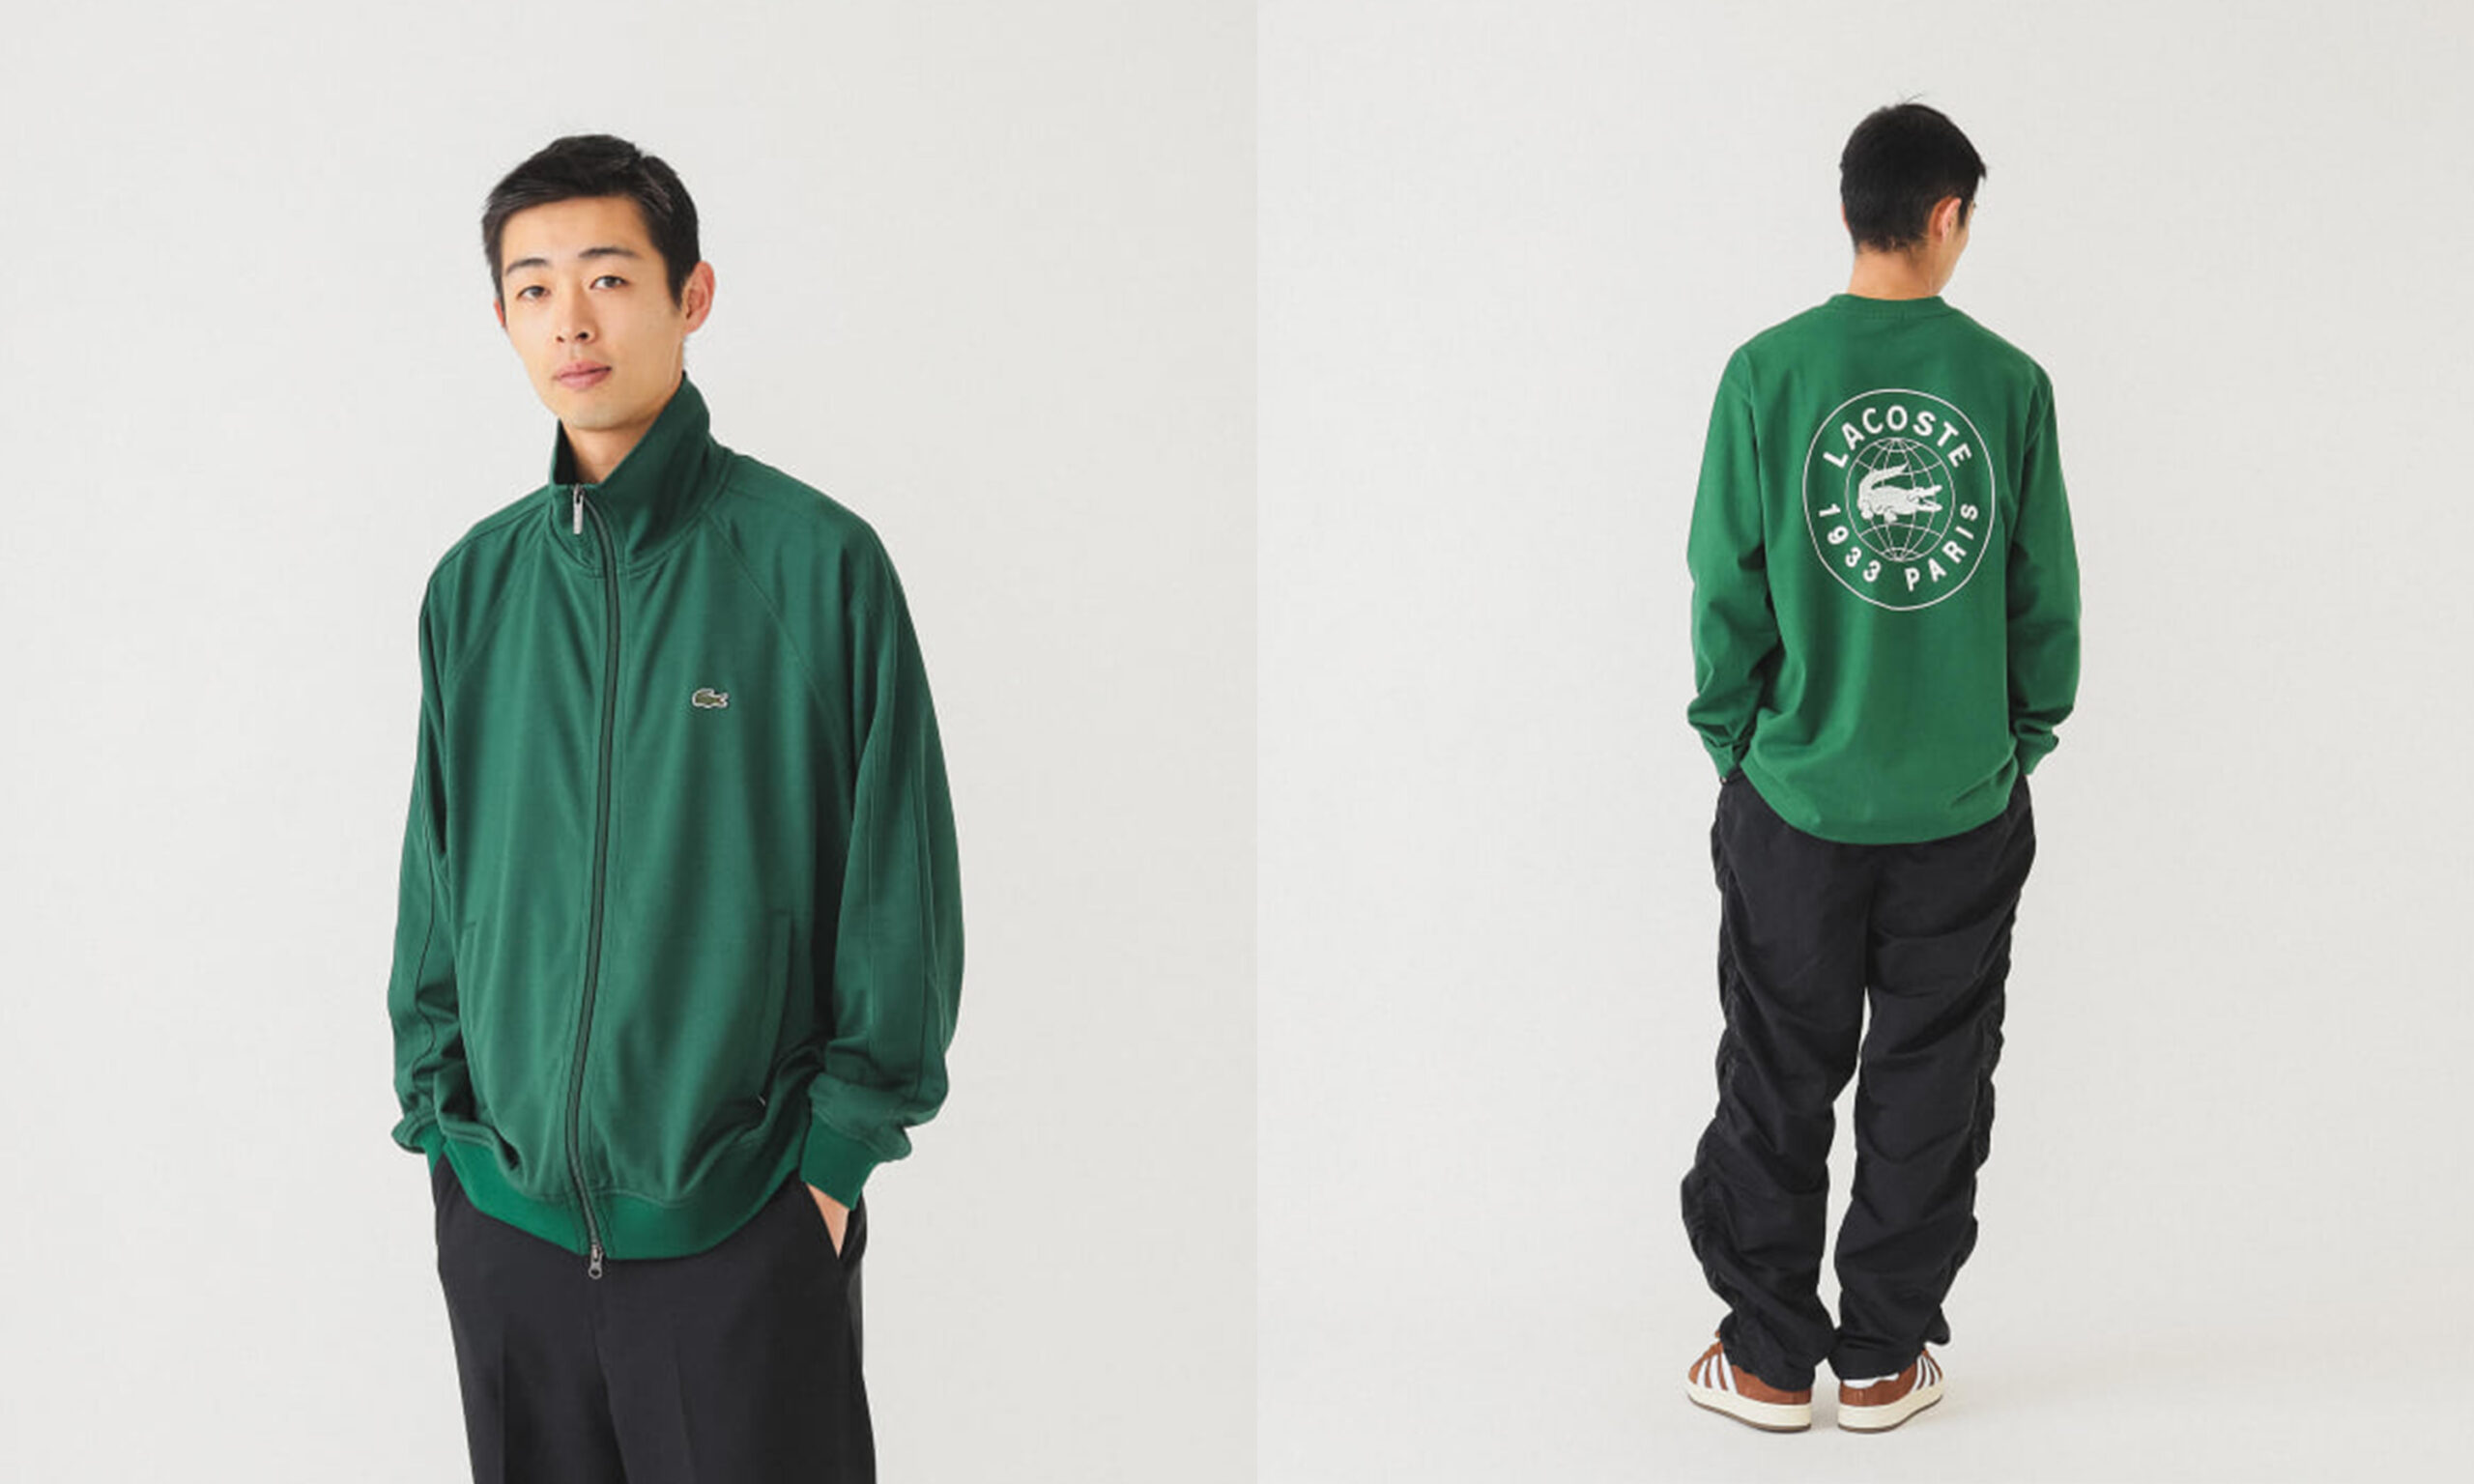 LACOSTE for BEAMS 別注系列发布